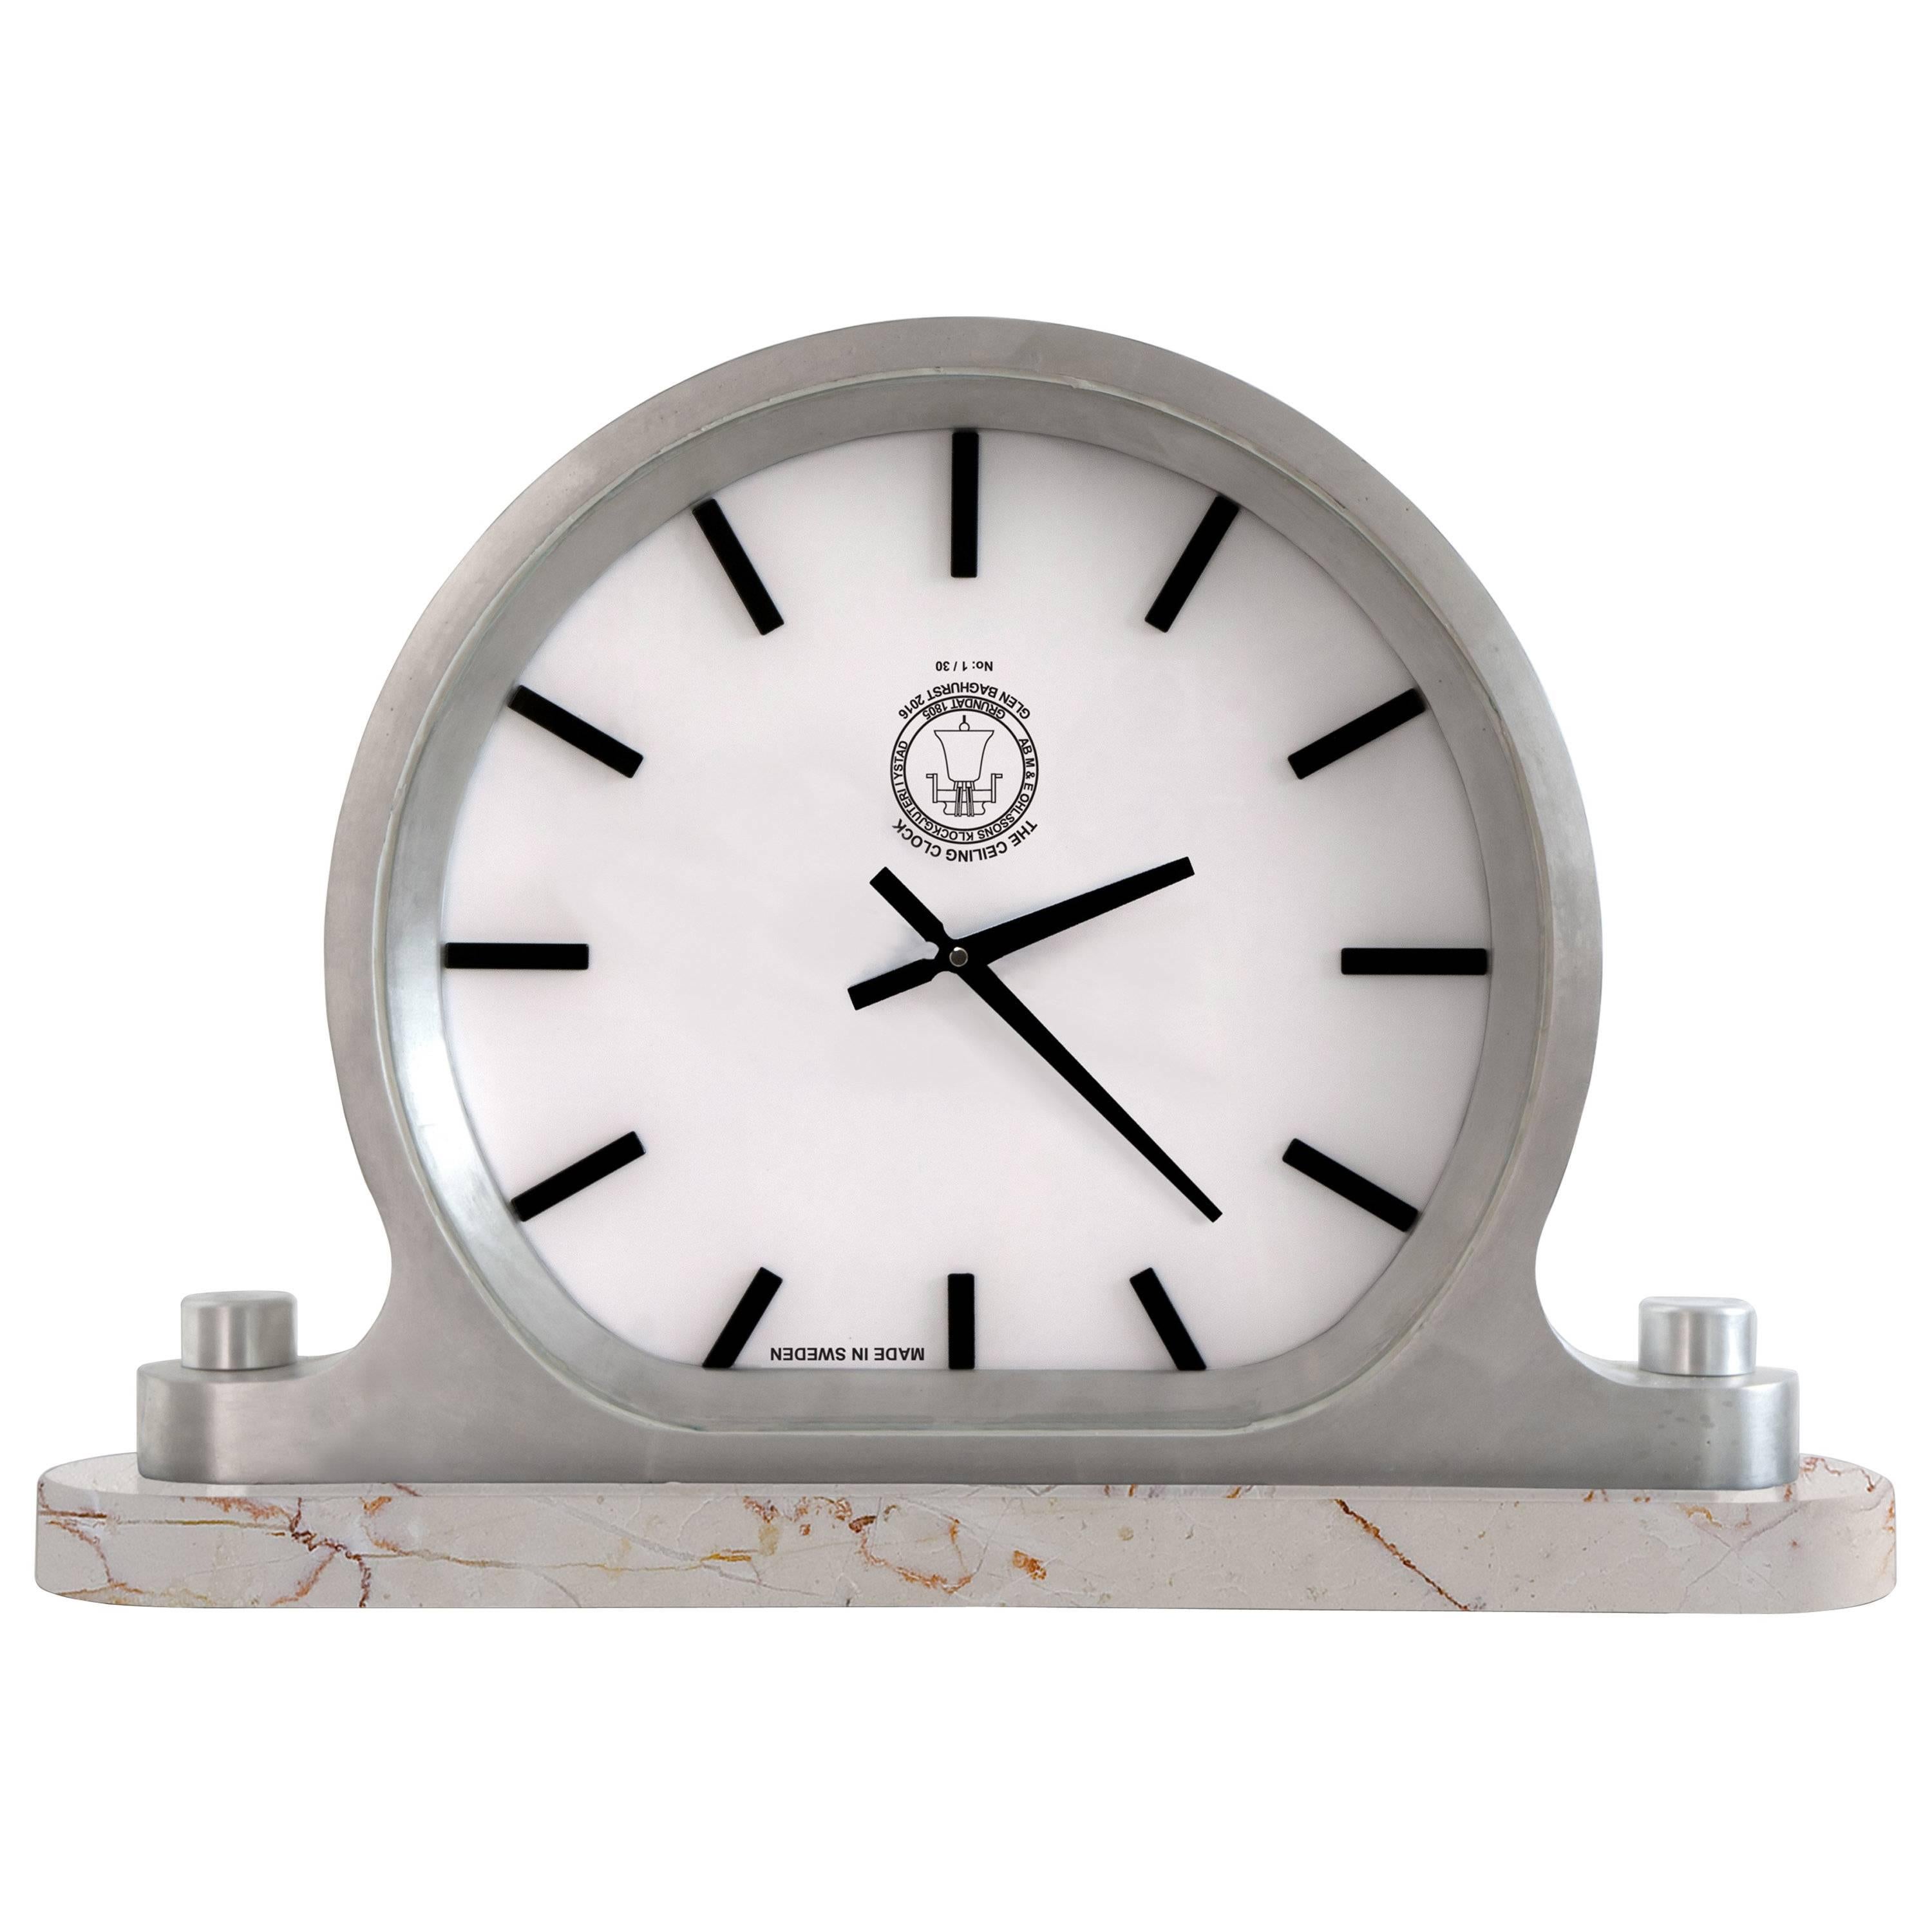 Mantle Wall Ceiling Clock Cast Aluminium Limestone by Master Swedish Bell Maker For Sale